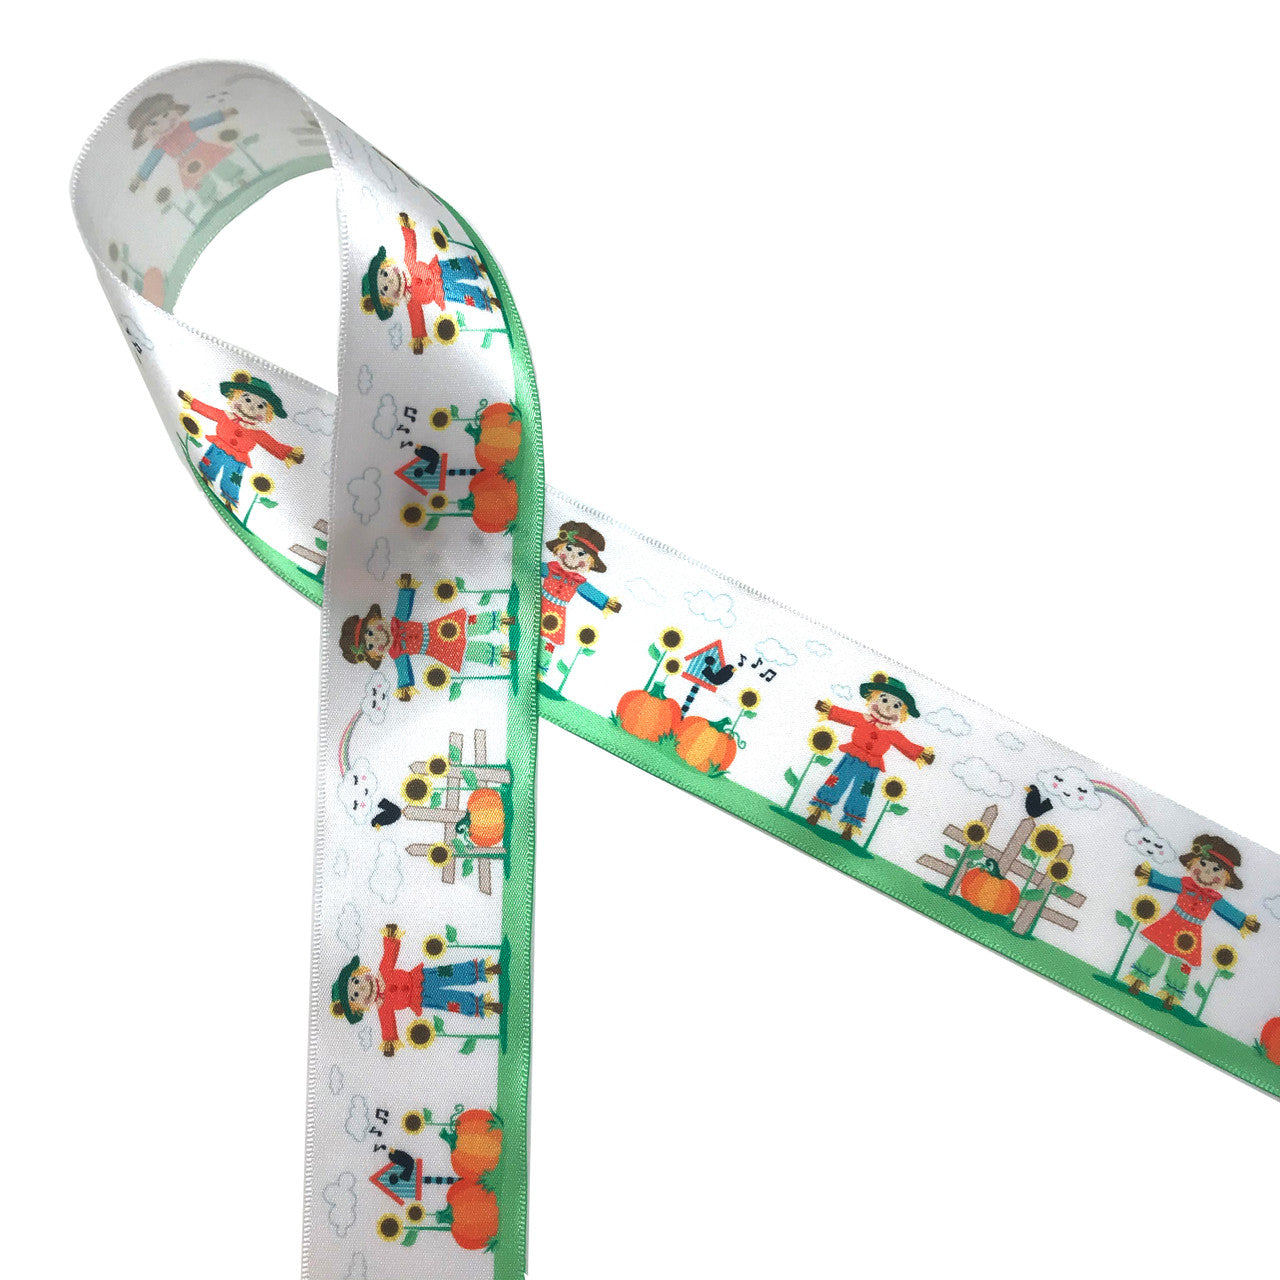 Our widest Scarecrow ribbon  printed on 1.5" single face satin features scarecrows with red jackets and blue pants in a garden of pumpkins and sunflowers with adorable little birdhouses. This sweet ribbon is perfect for Fall decor, wreaths and crafts. Be sure to add this ribbon to your Fall collection. Our ribbon is Designed and printed in the USA